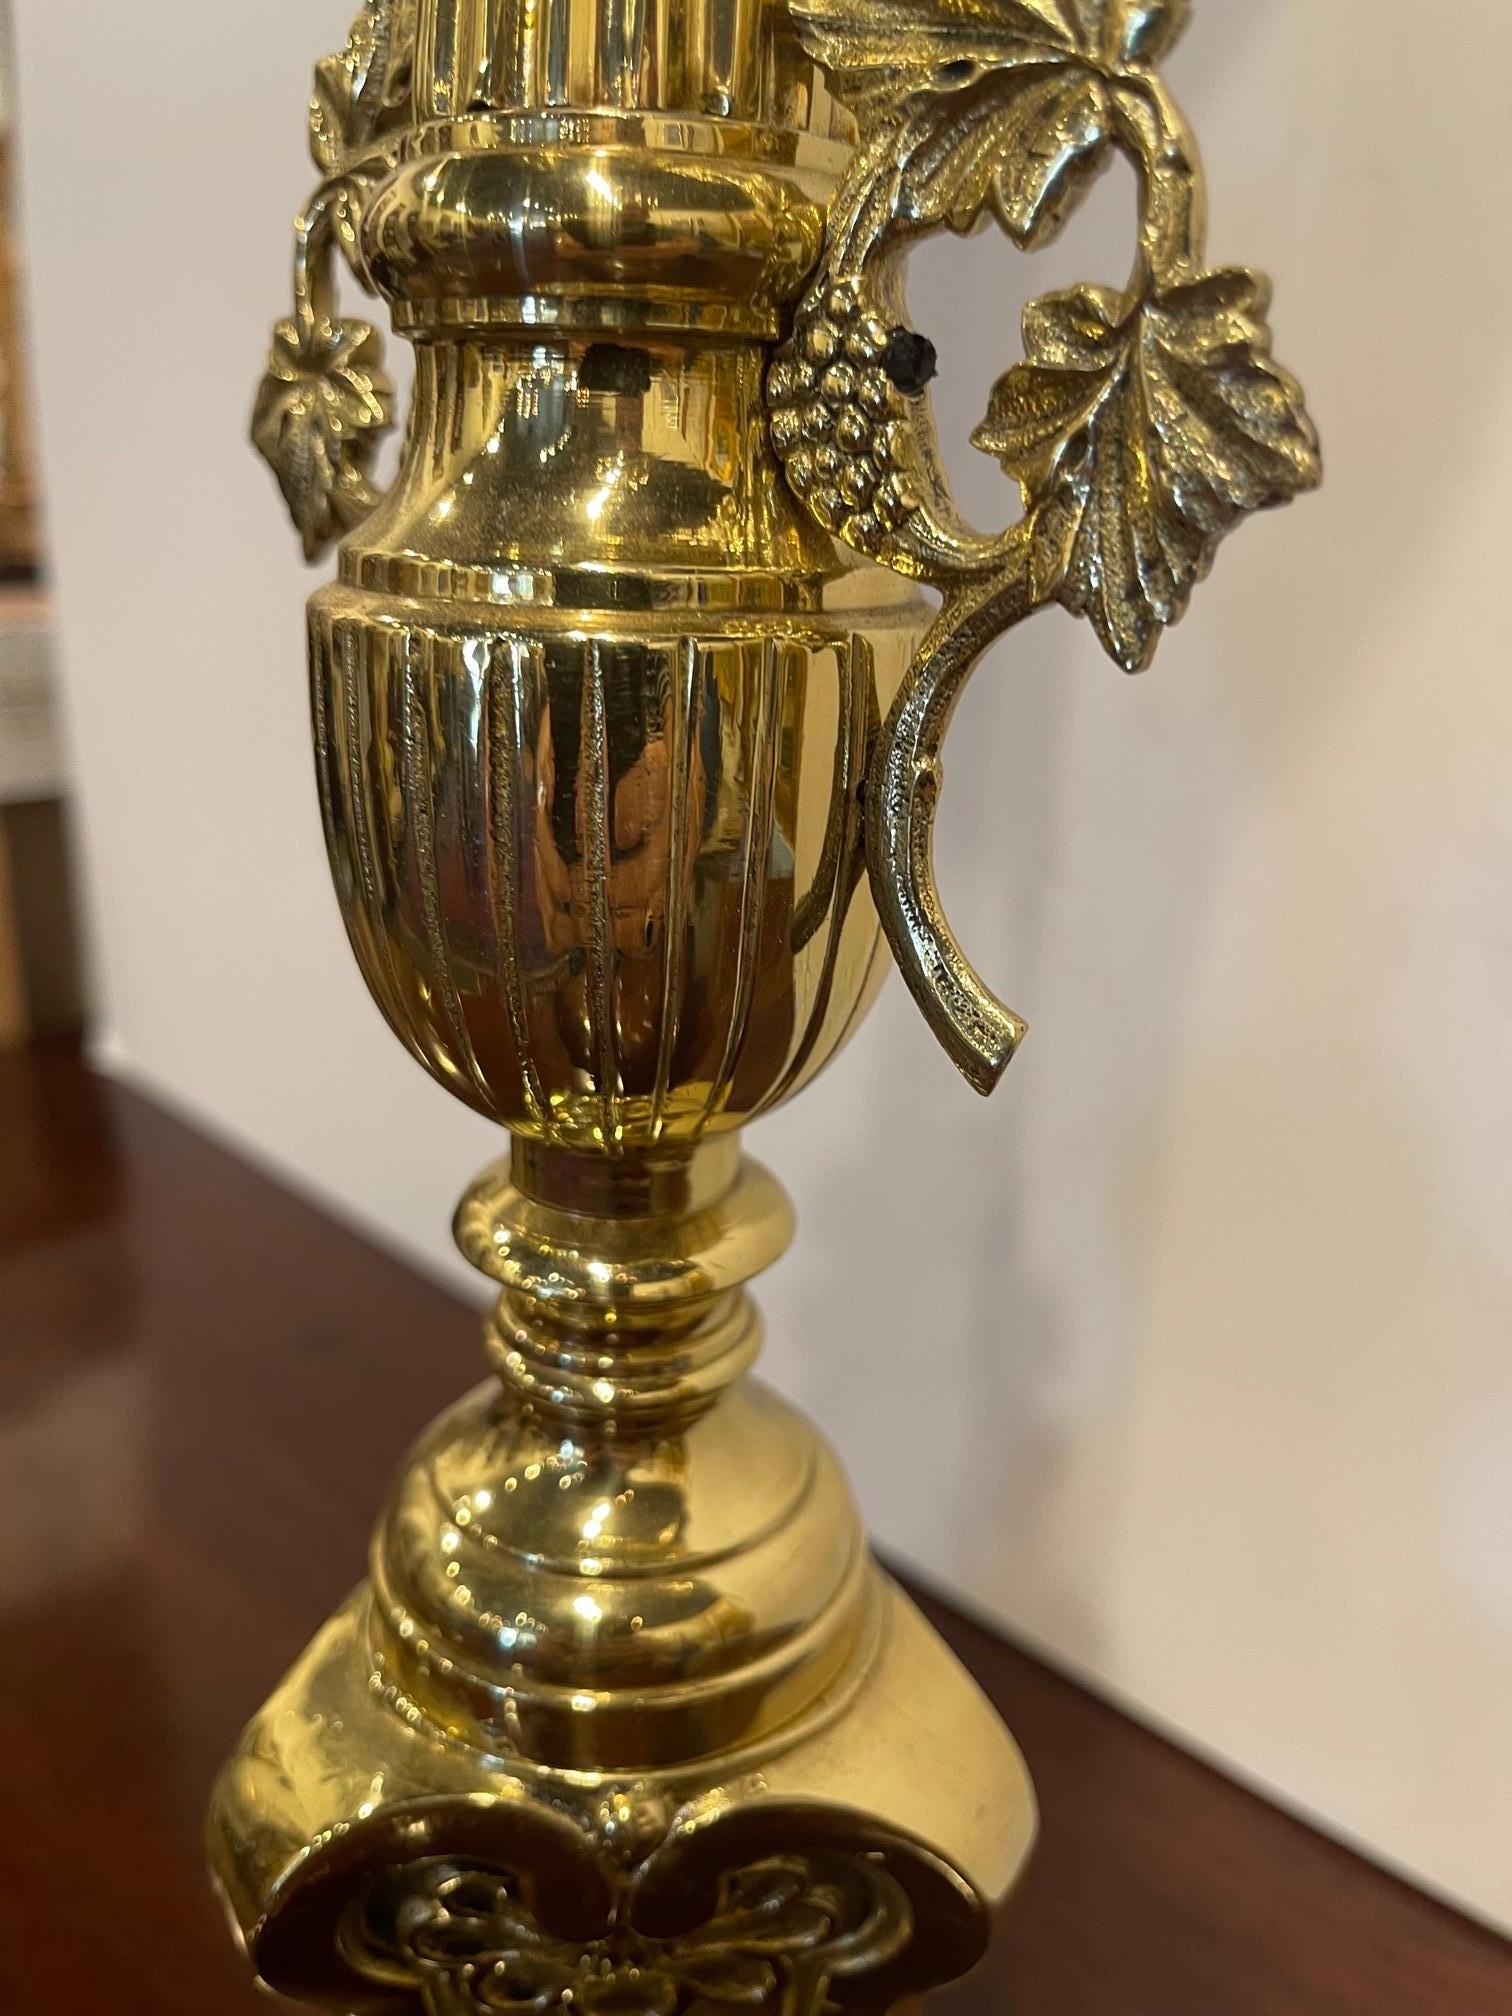 French Polished Brass Decorative Pricket or Candlestick, 19th Century In Good Condition For Sale In Savannah, GA